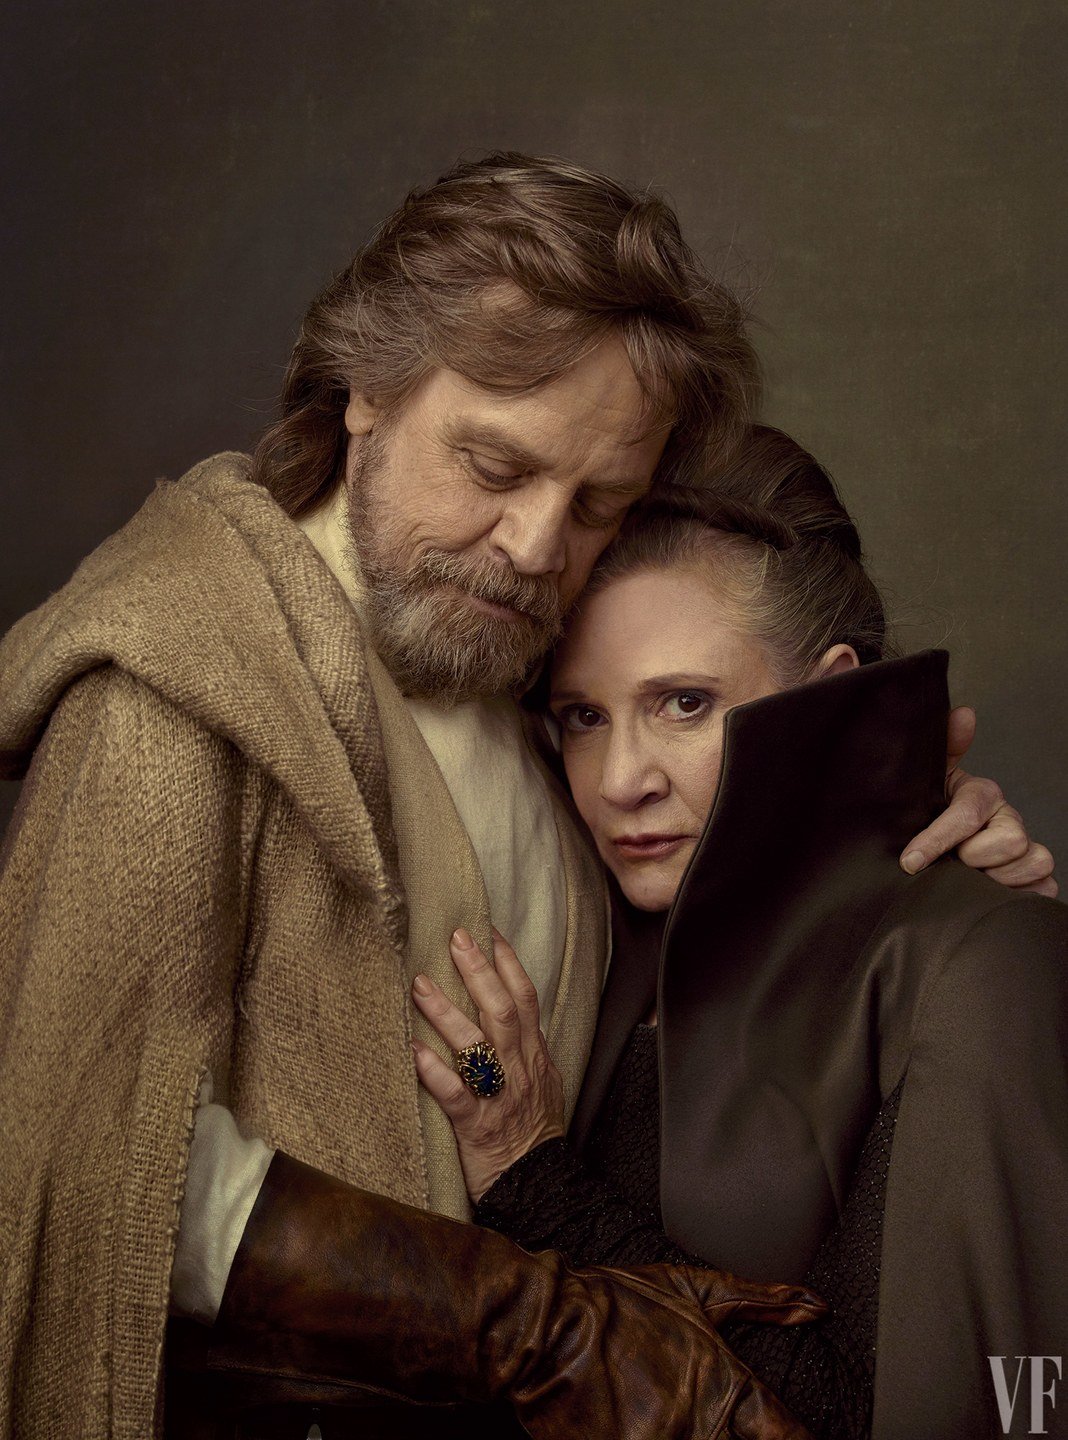 Mark Hamill remembers Carrie Fisher on her 65th birthday